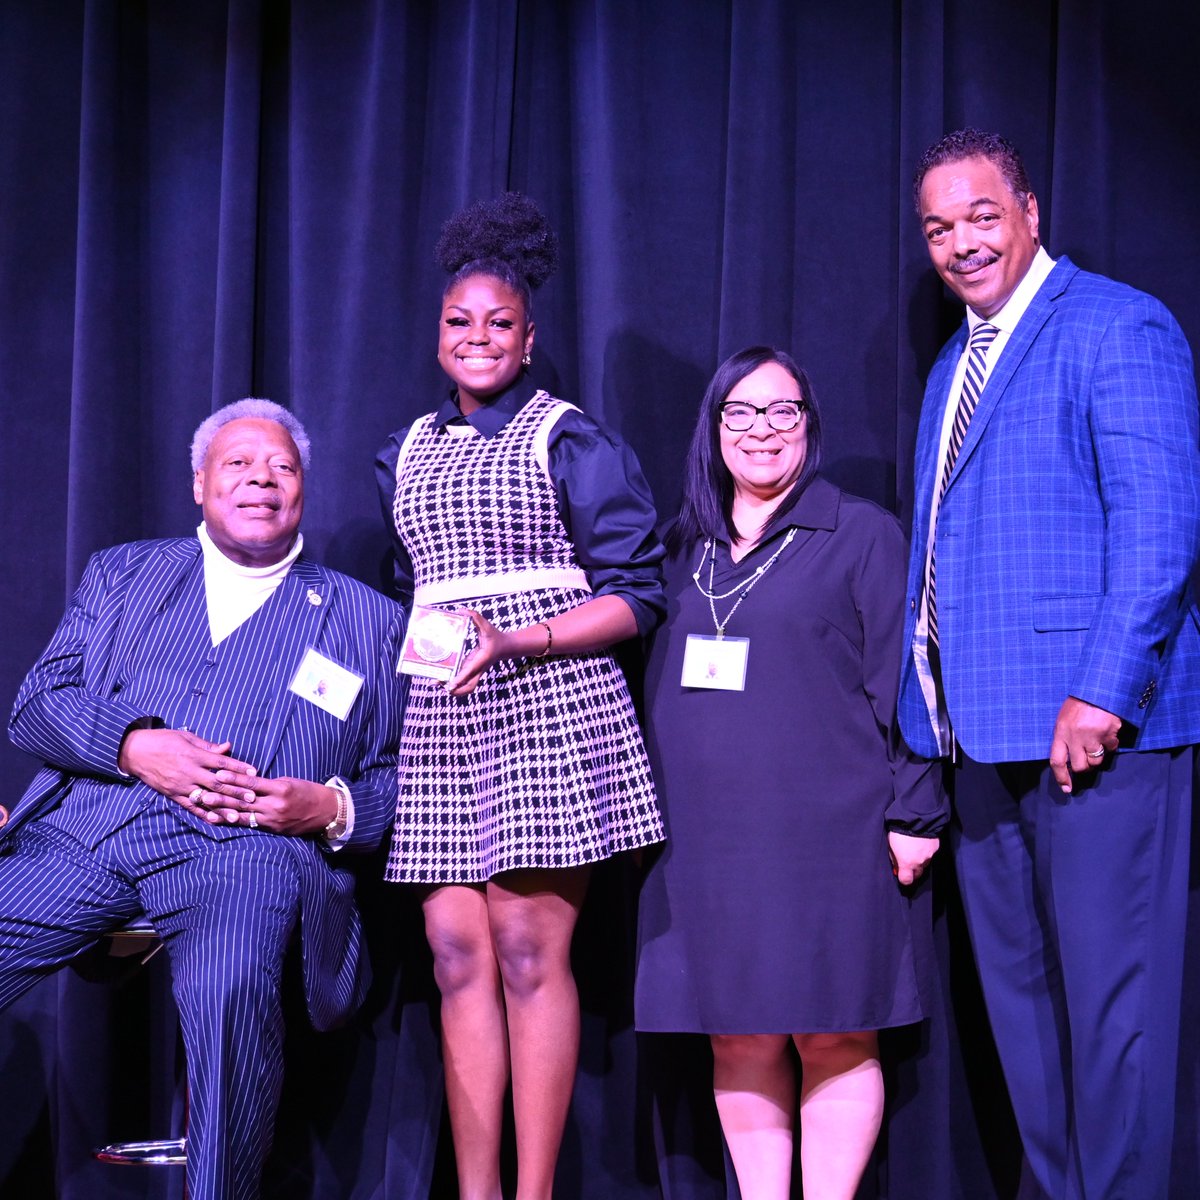 Congrats to RHS student Taylynn Hurt, winner of the senior division of the Ohio Dr. Martin Luther King Jr. Holiday Commission’s Annual Statewide MLK Oratorical Contest. Taylynn was one of 26 youth who delivered speeches inspired by Dr. King's lessons & legacy. #REYNProud